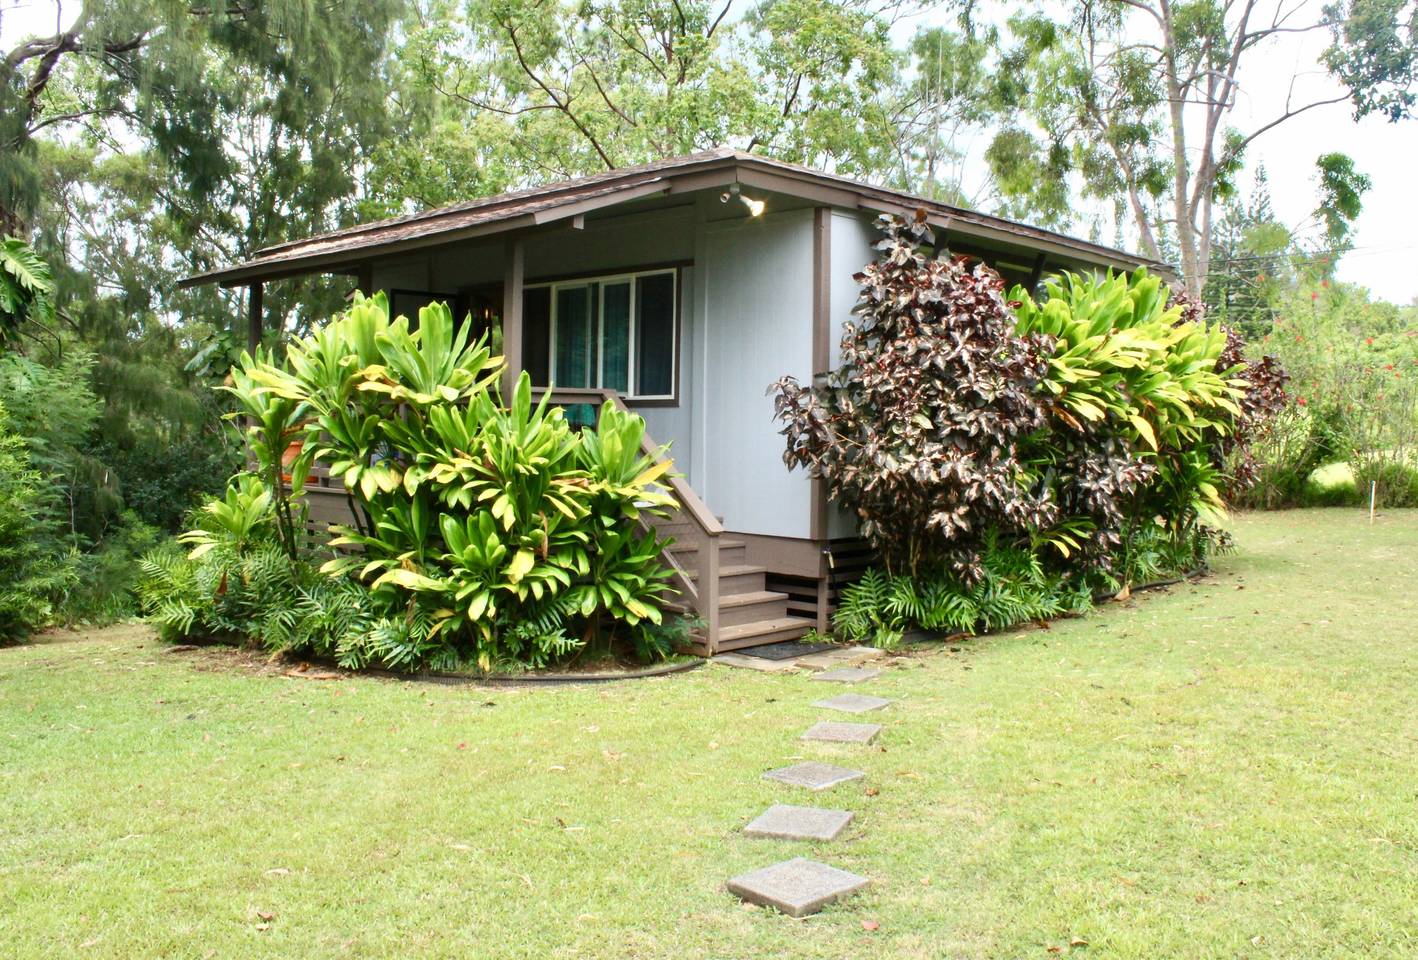 North Shore cottage in Oahu Hawaii